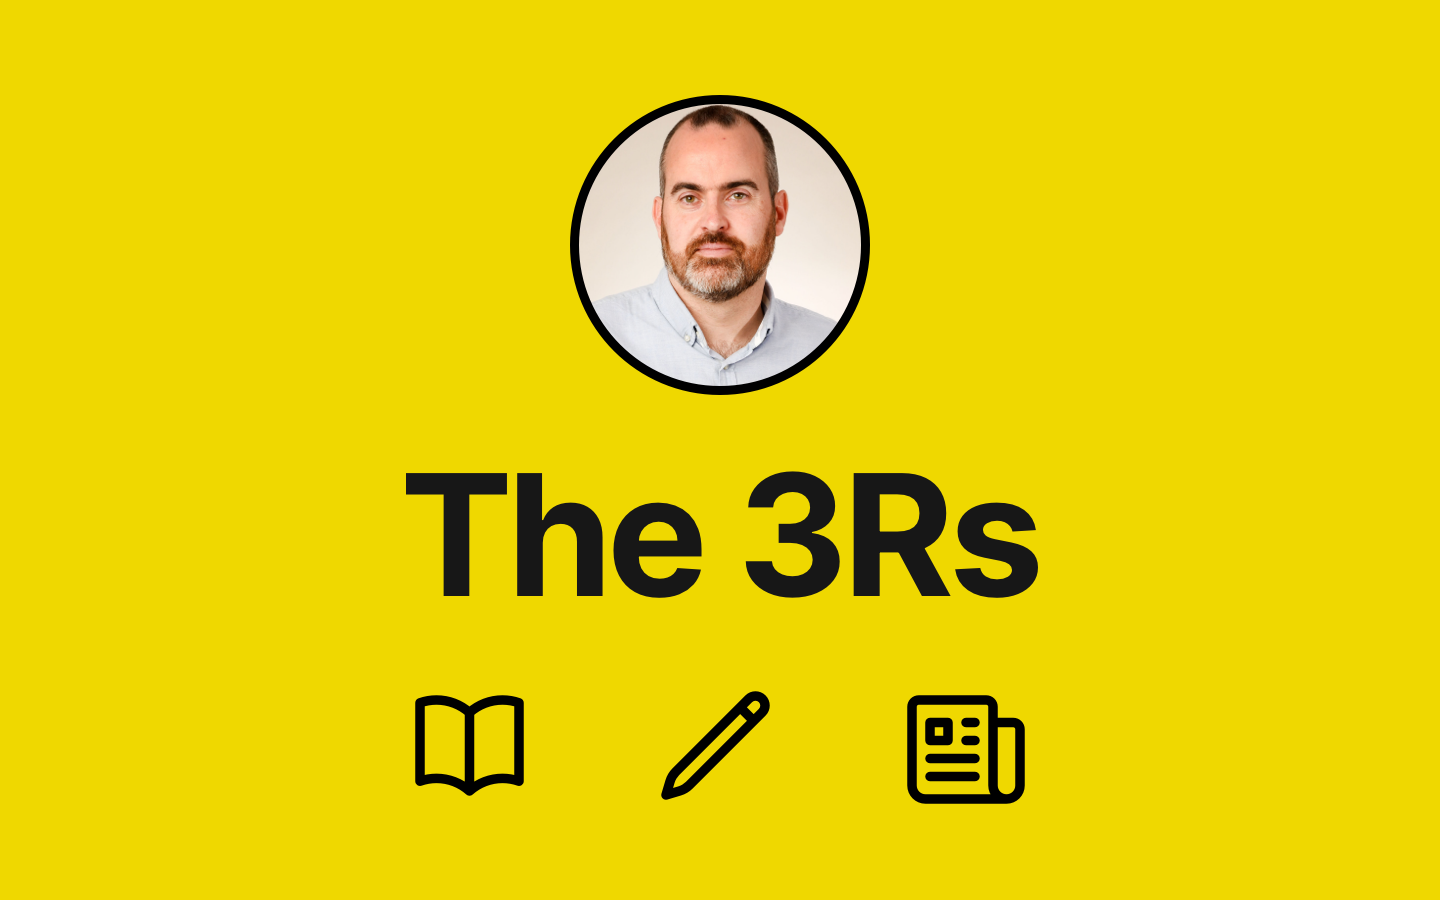 The 3Rs - Reading, w®iting, and research to be interested in #18 feature image